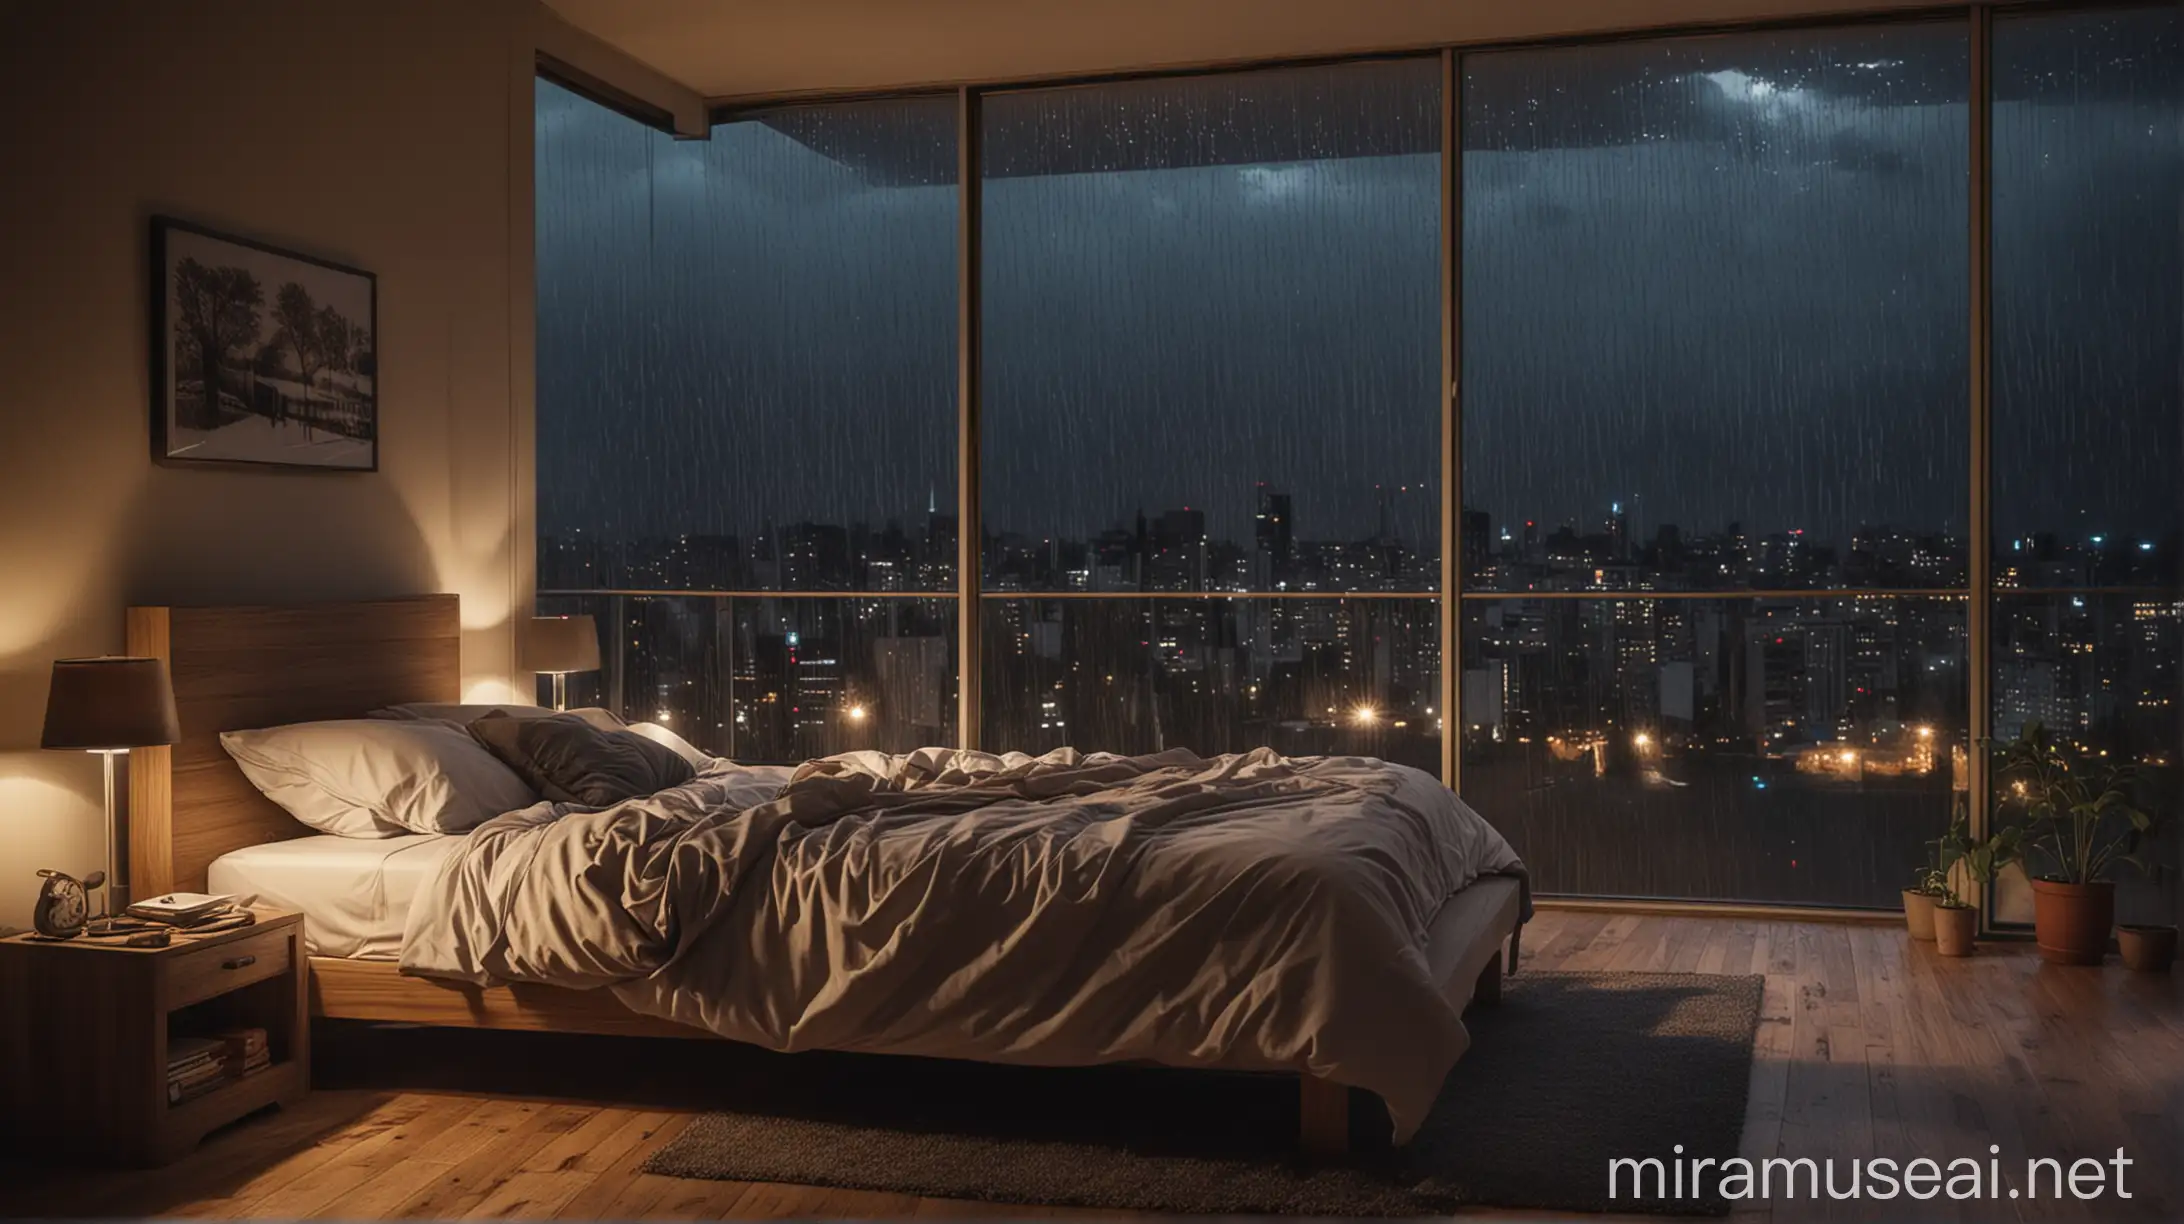 bedroom at night during rainy weather